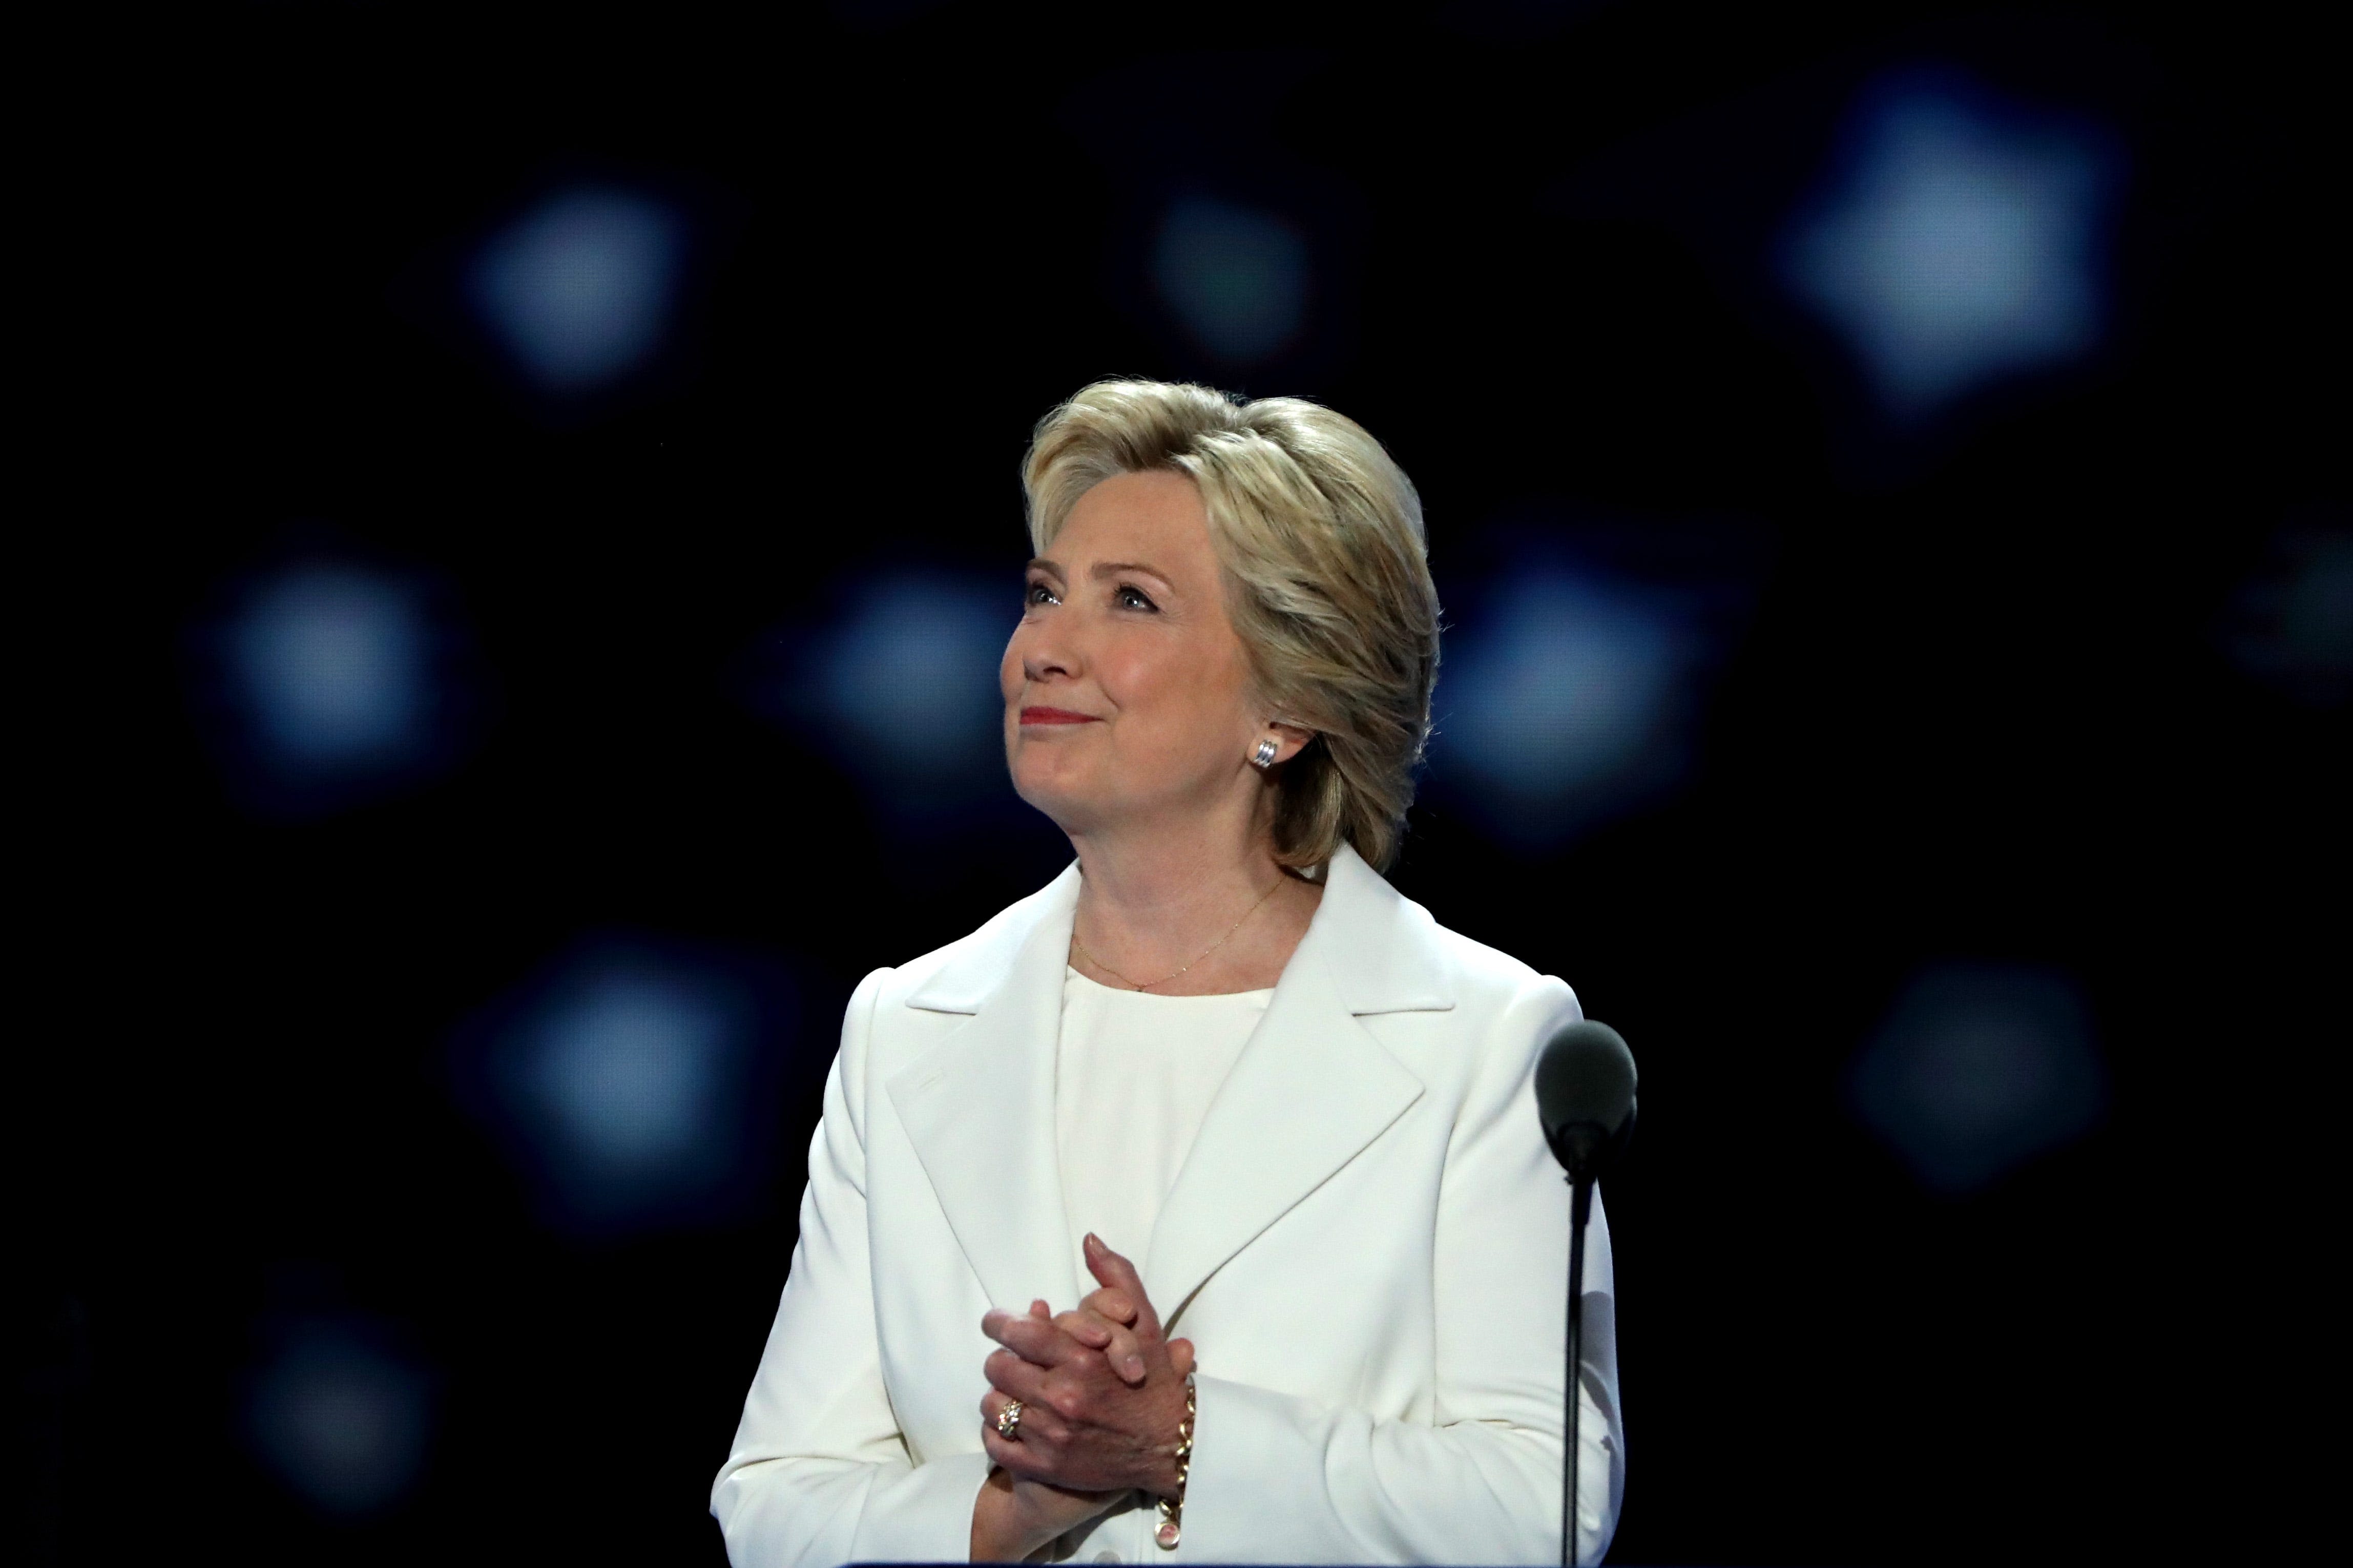 The Democratic presidential nomination isn't set yet. Could Hillary Clinton replace Biden?